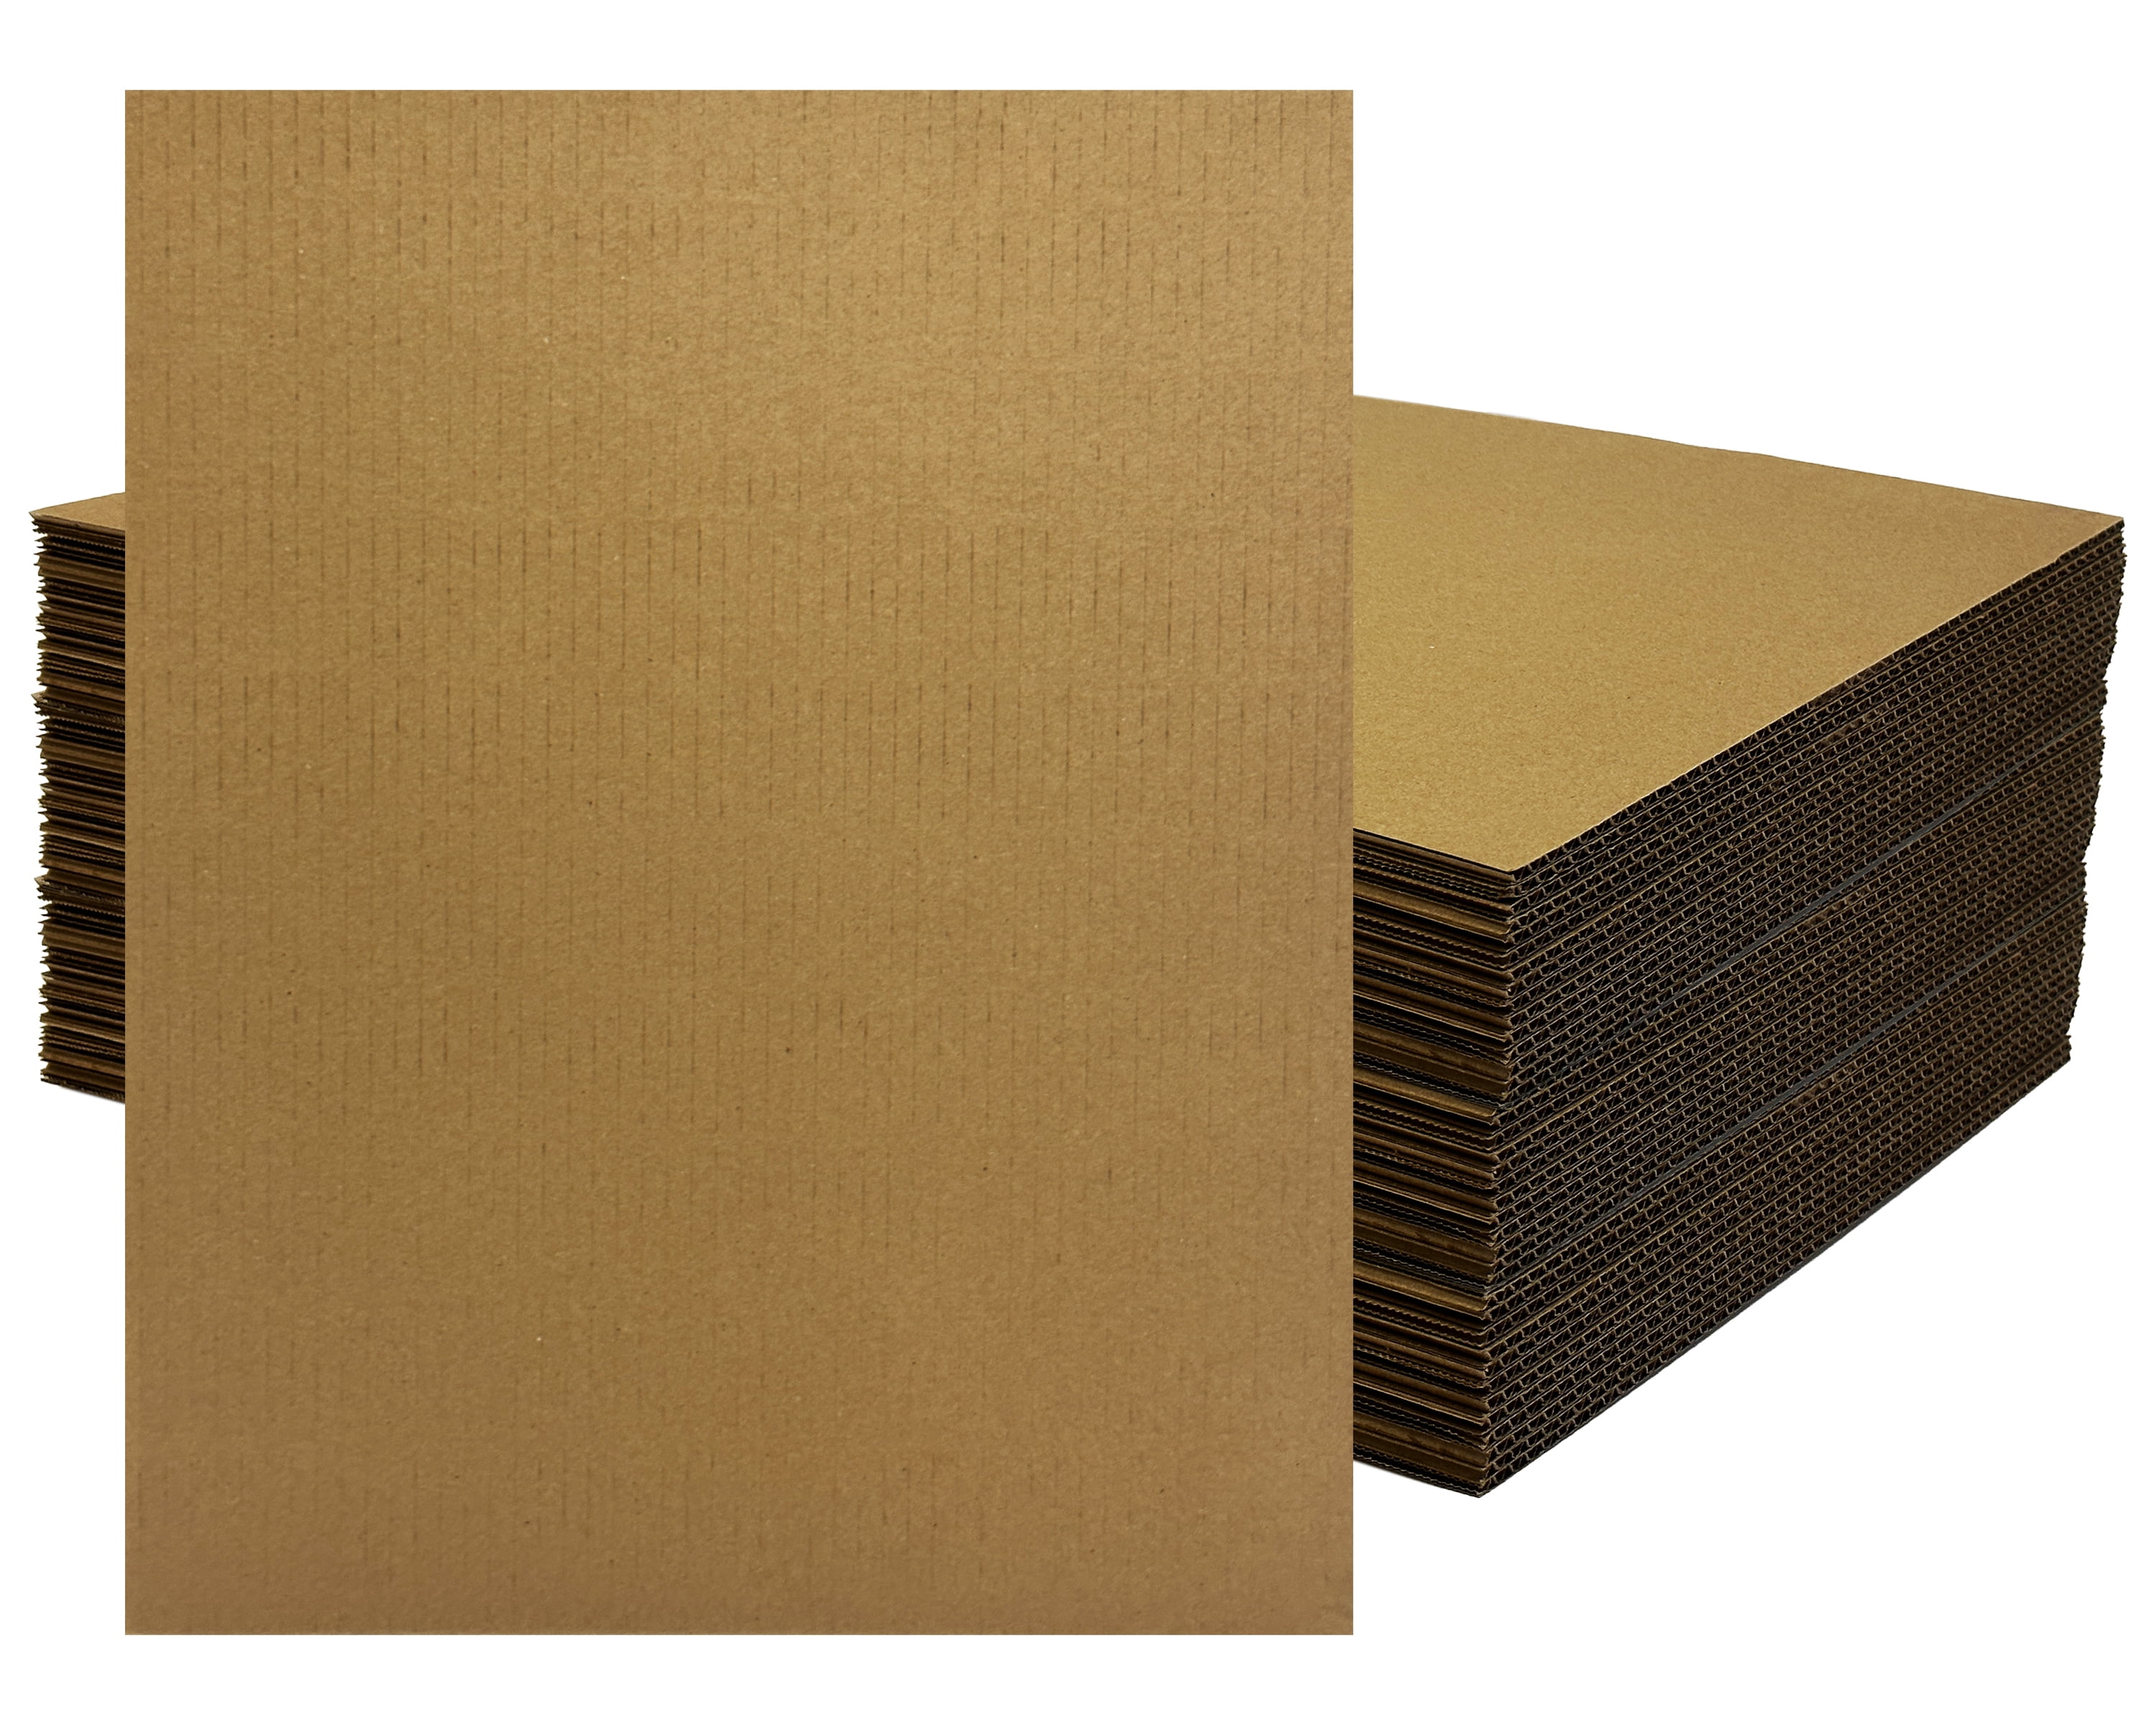 Cardboard sheets 5 ft x 4 ft for use in landscaping. - Livermore, CA Patch